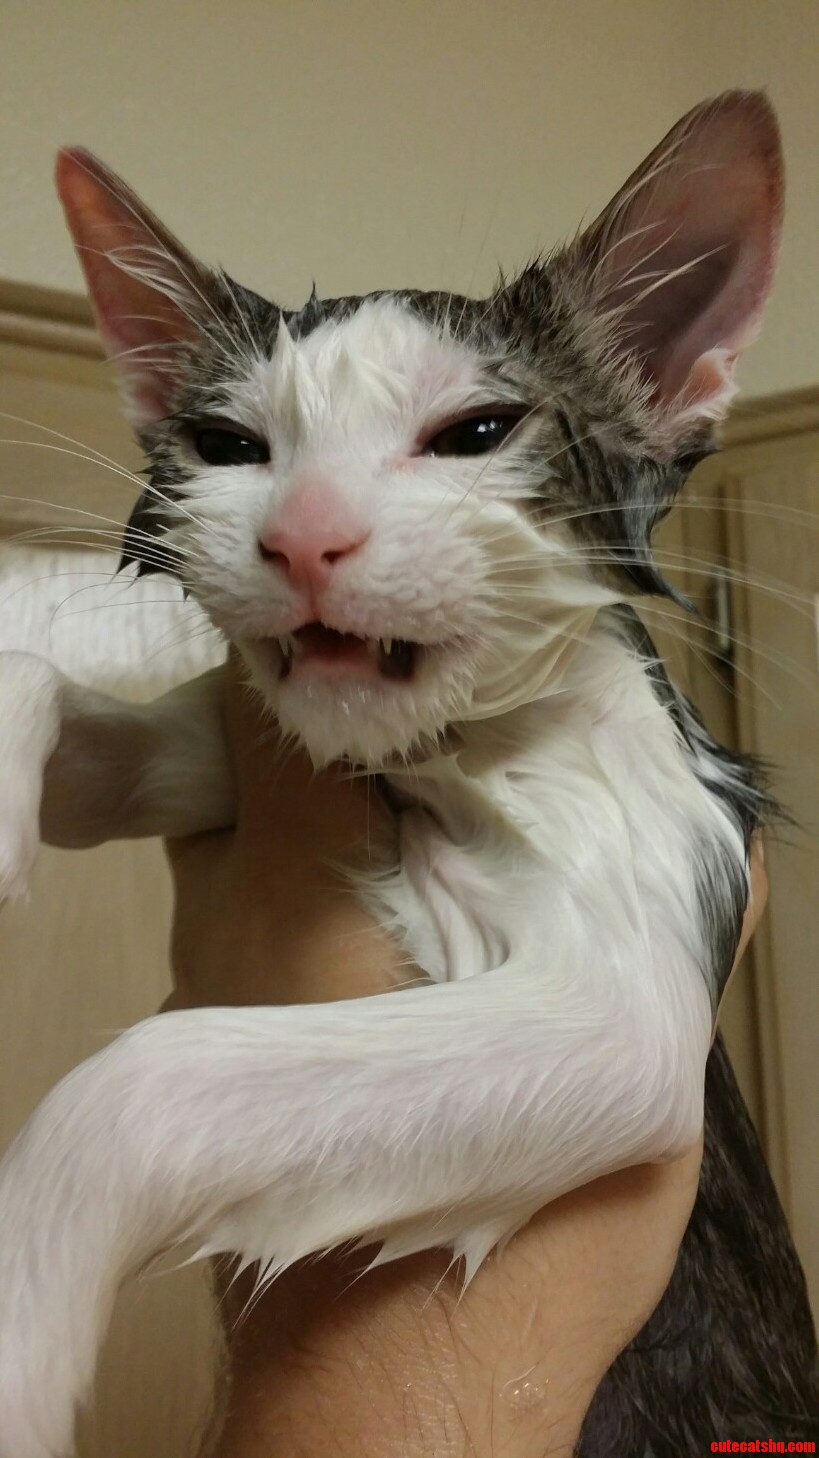 Desmo Might Be A Little Miffed About Bath Time…..